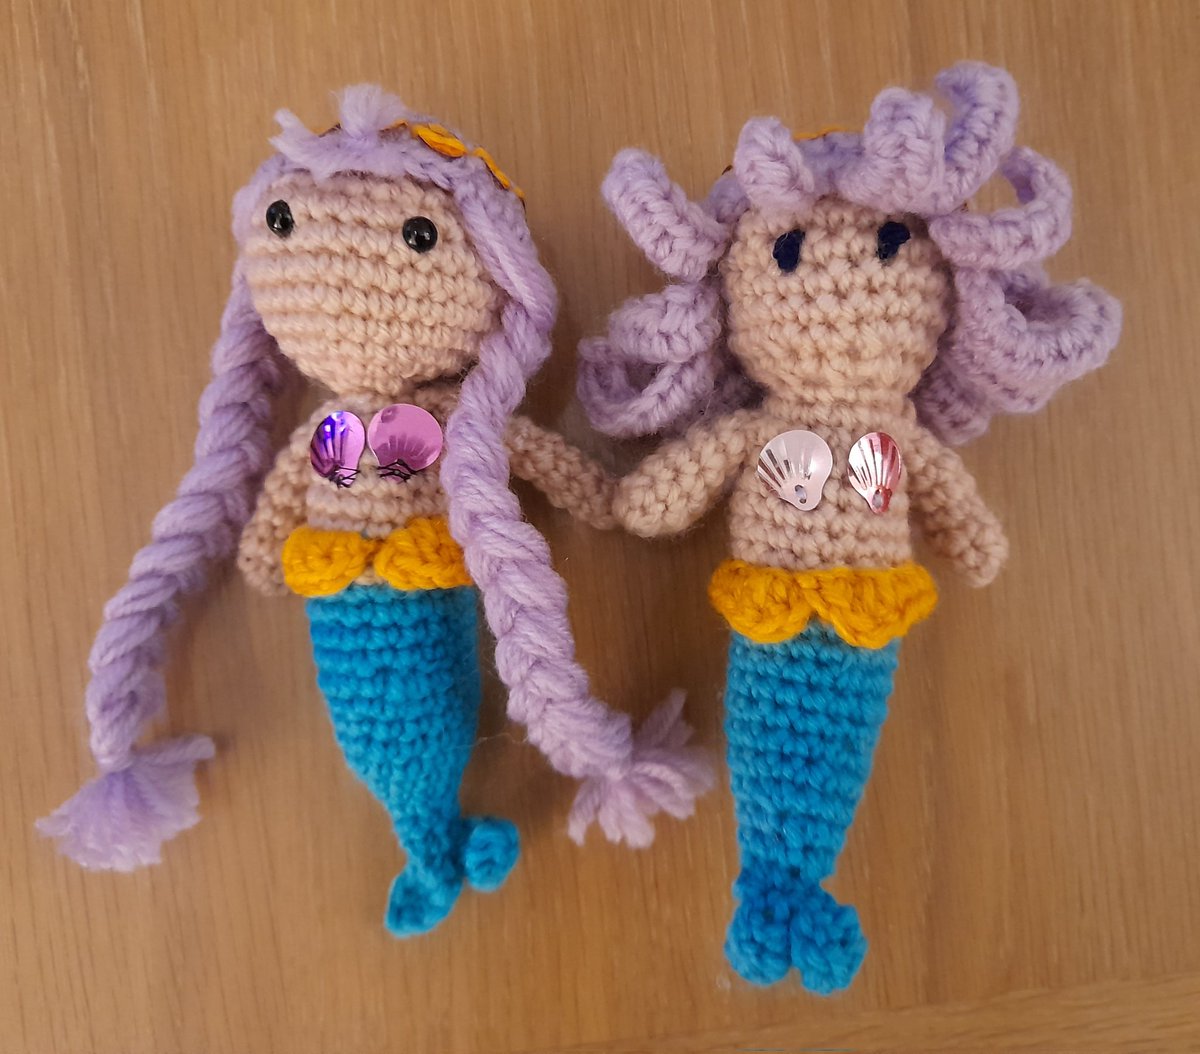 Love dark holiday evenings - making the most of them by creating some small world play figures for school. Can't wait to see the interactive play in P1-3 once these hit the tuff tray! #lovetoknit #smallworldplay